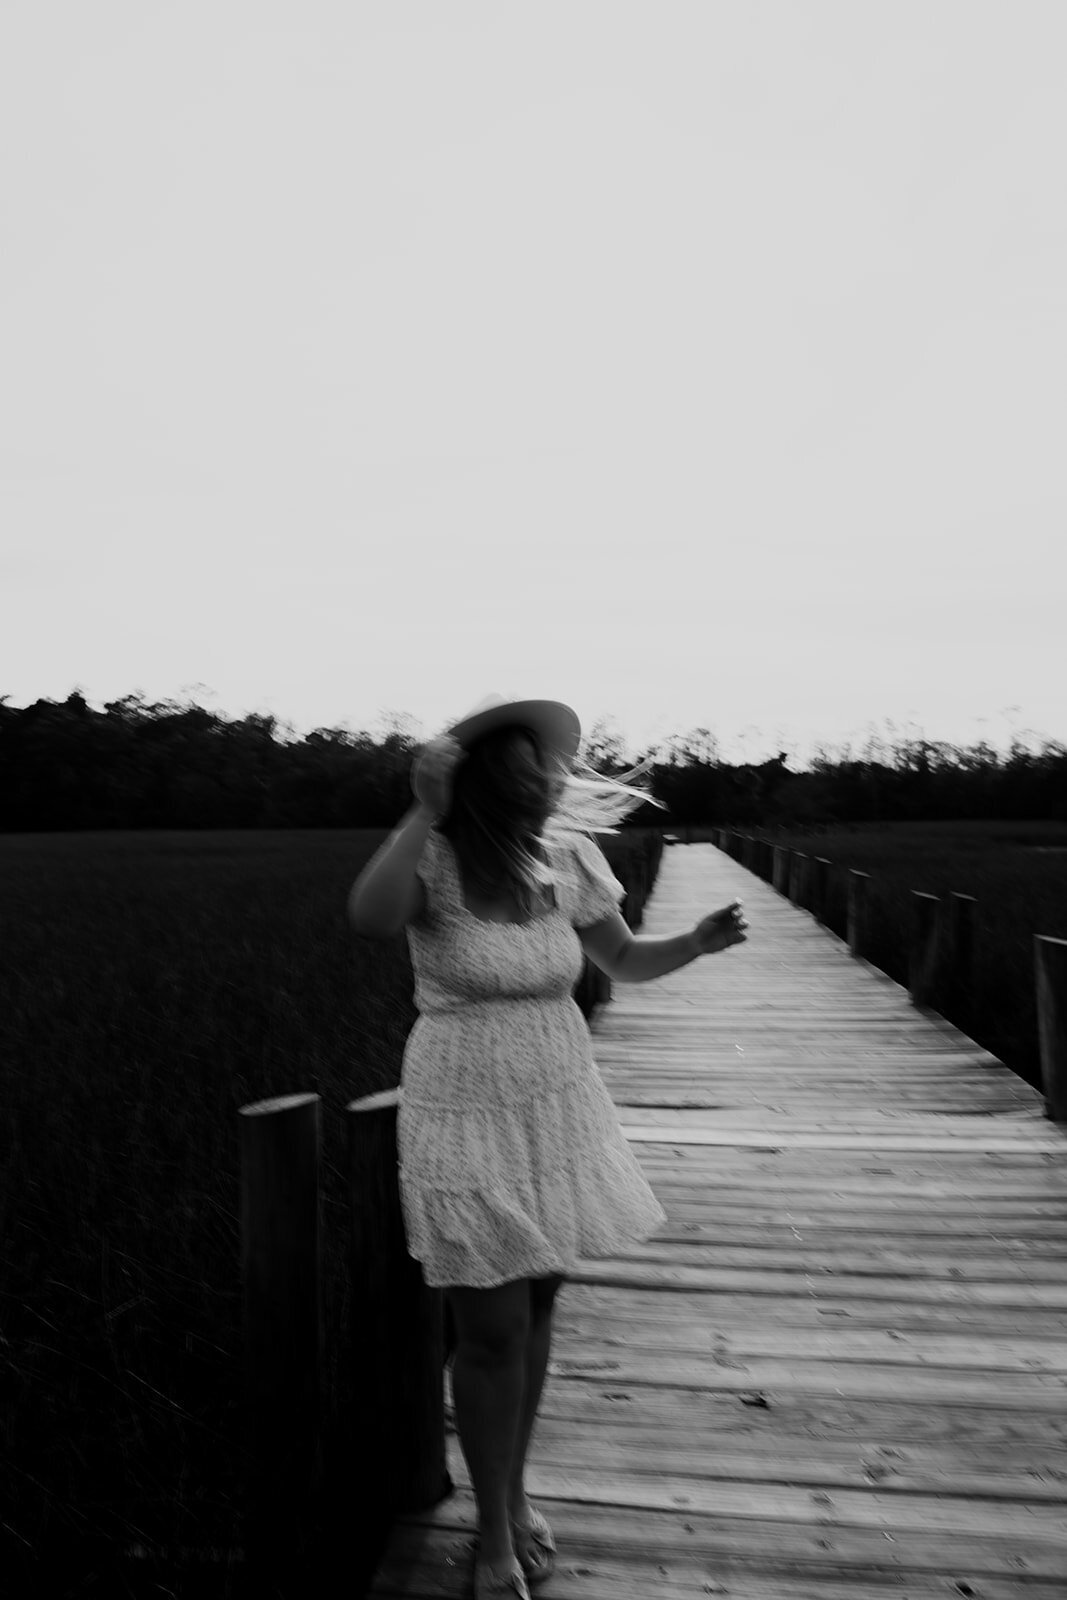 Artsy black and white photo of woman twirling on wooden boardwalk. Slight motion blurr.